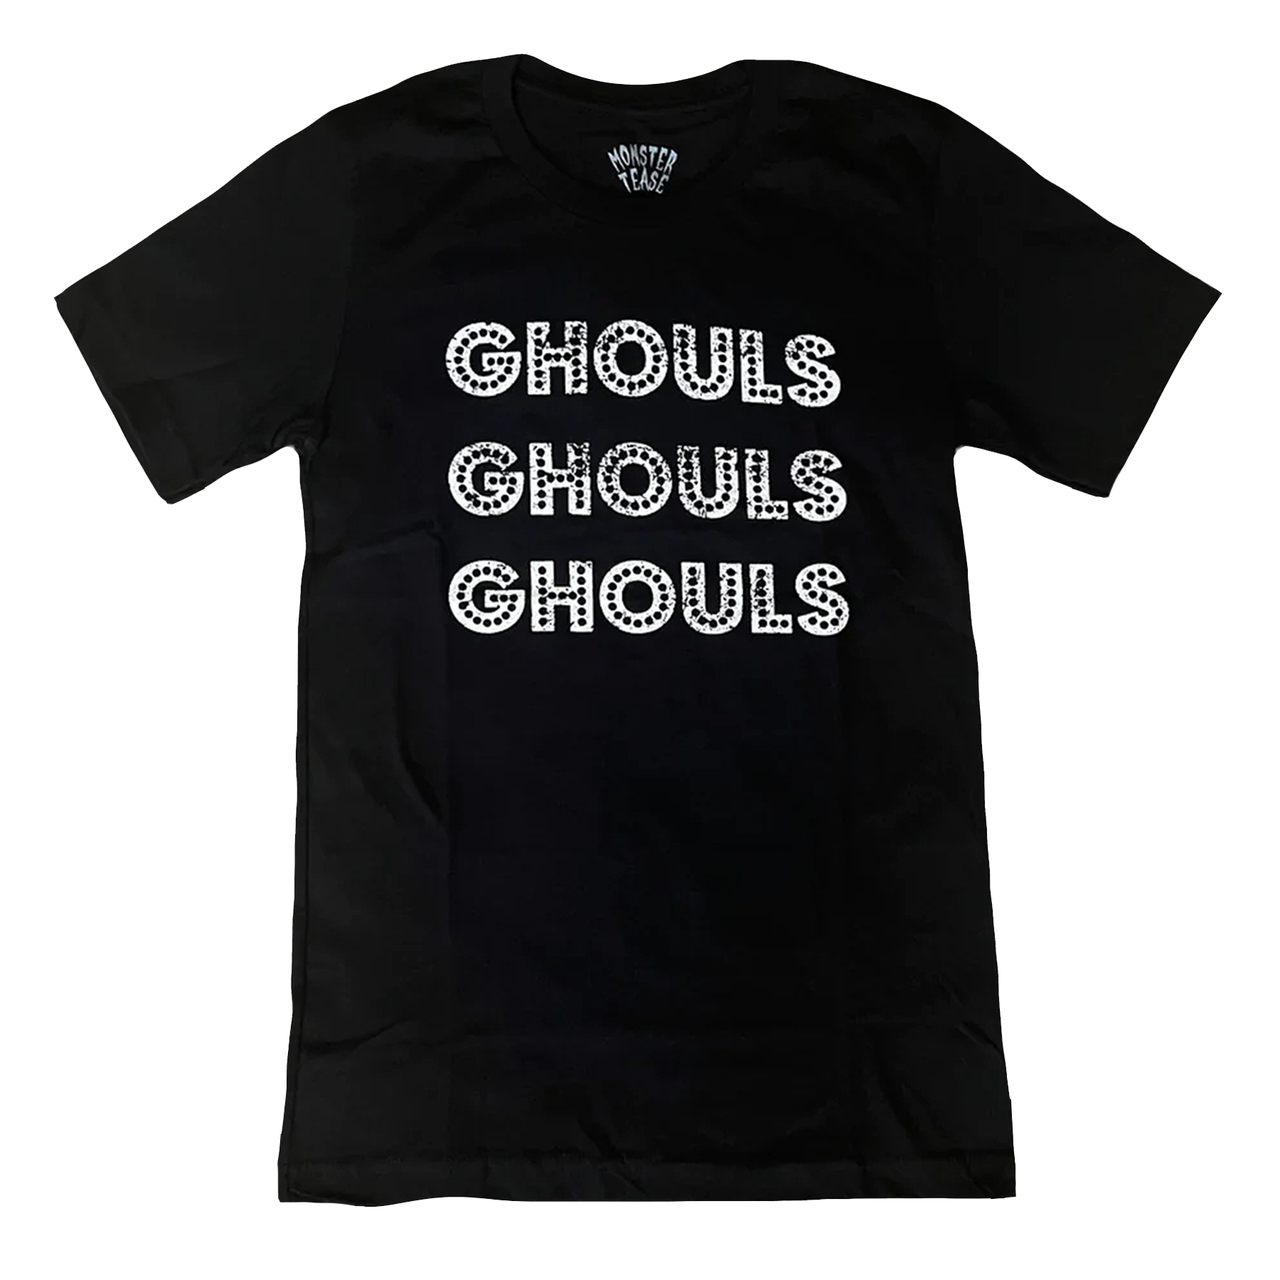 MONSTER TEASE GHOULS GHOULS GHOULS T SHIRT